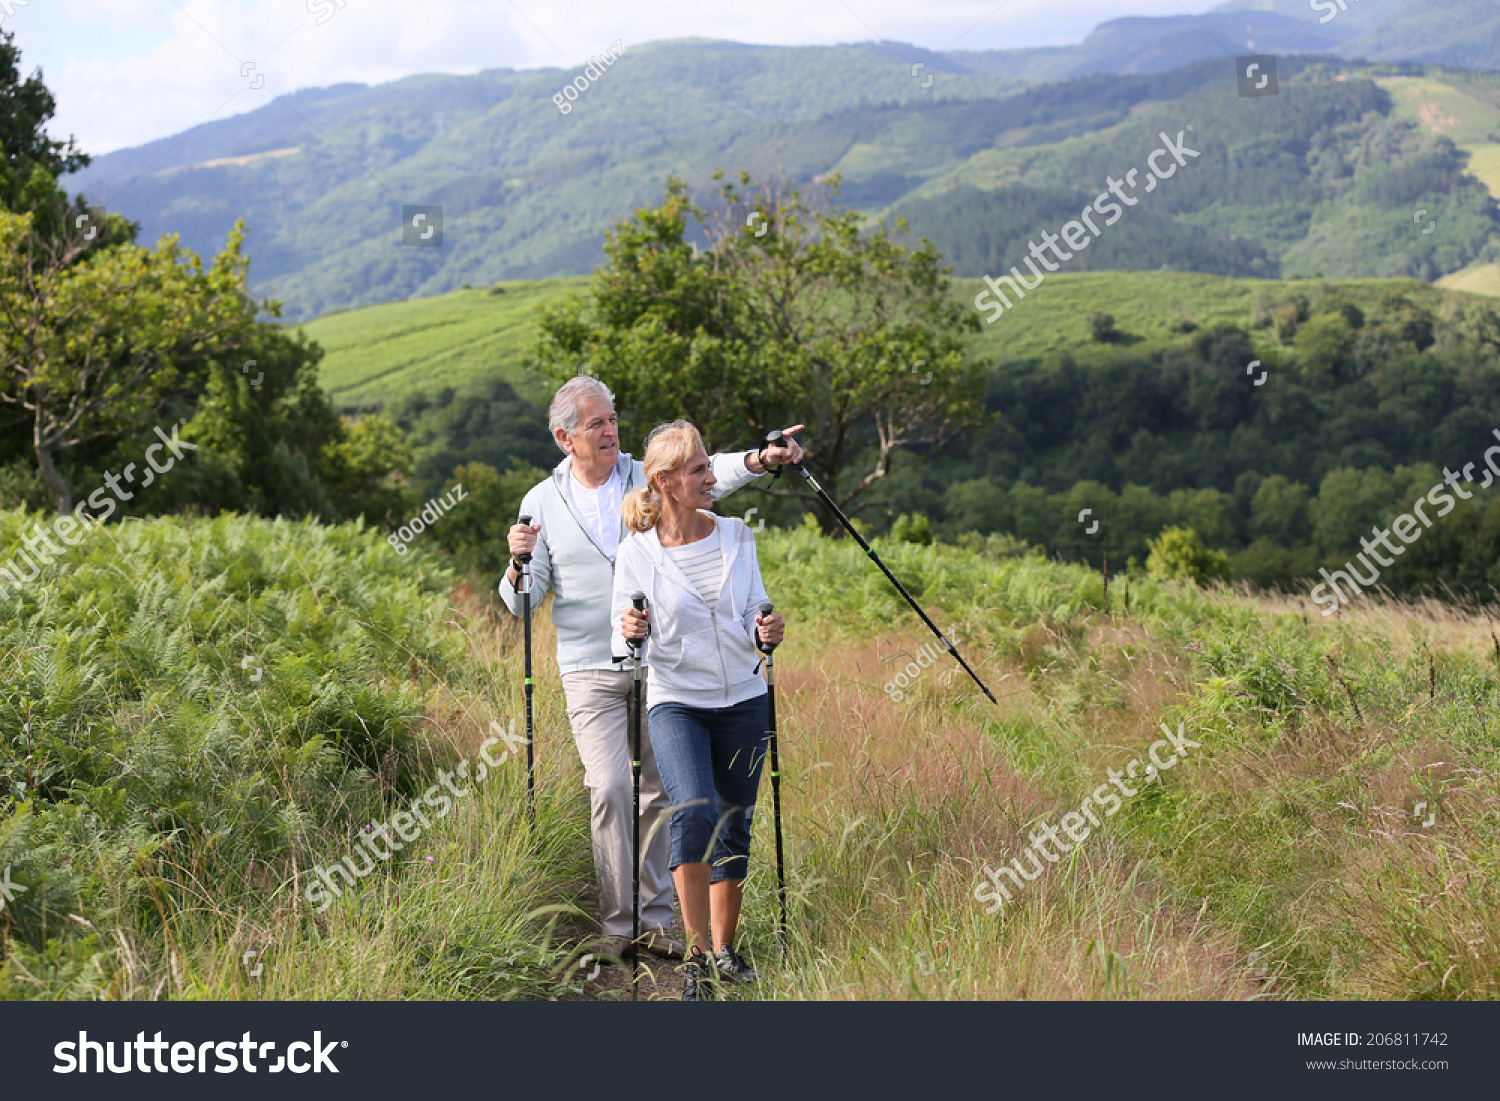 Senior couple on a hiking day  #206811742